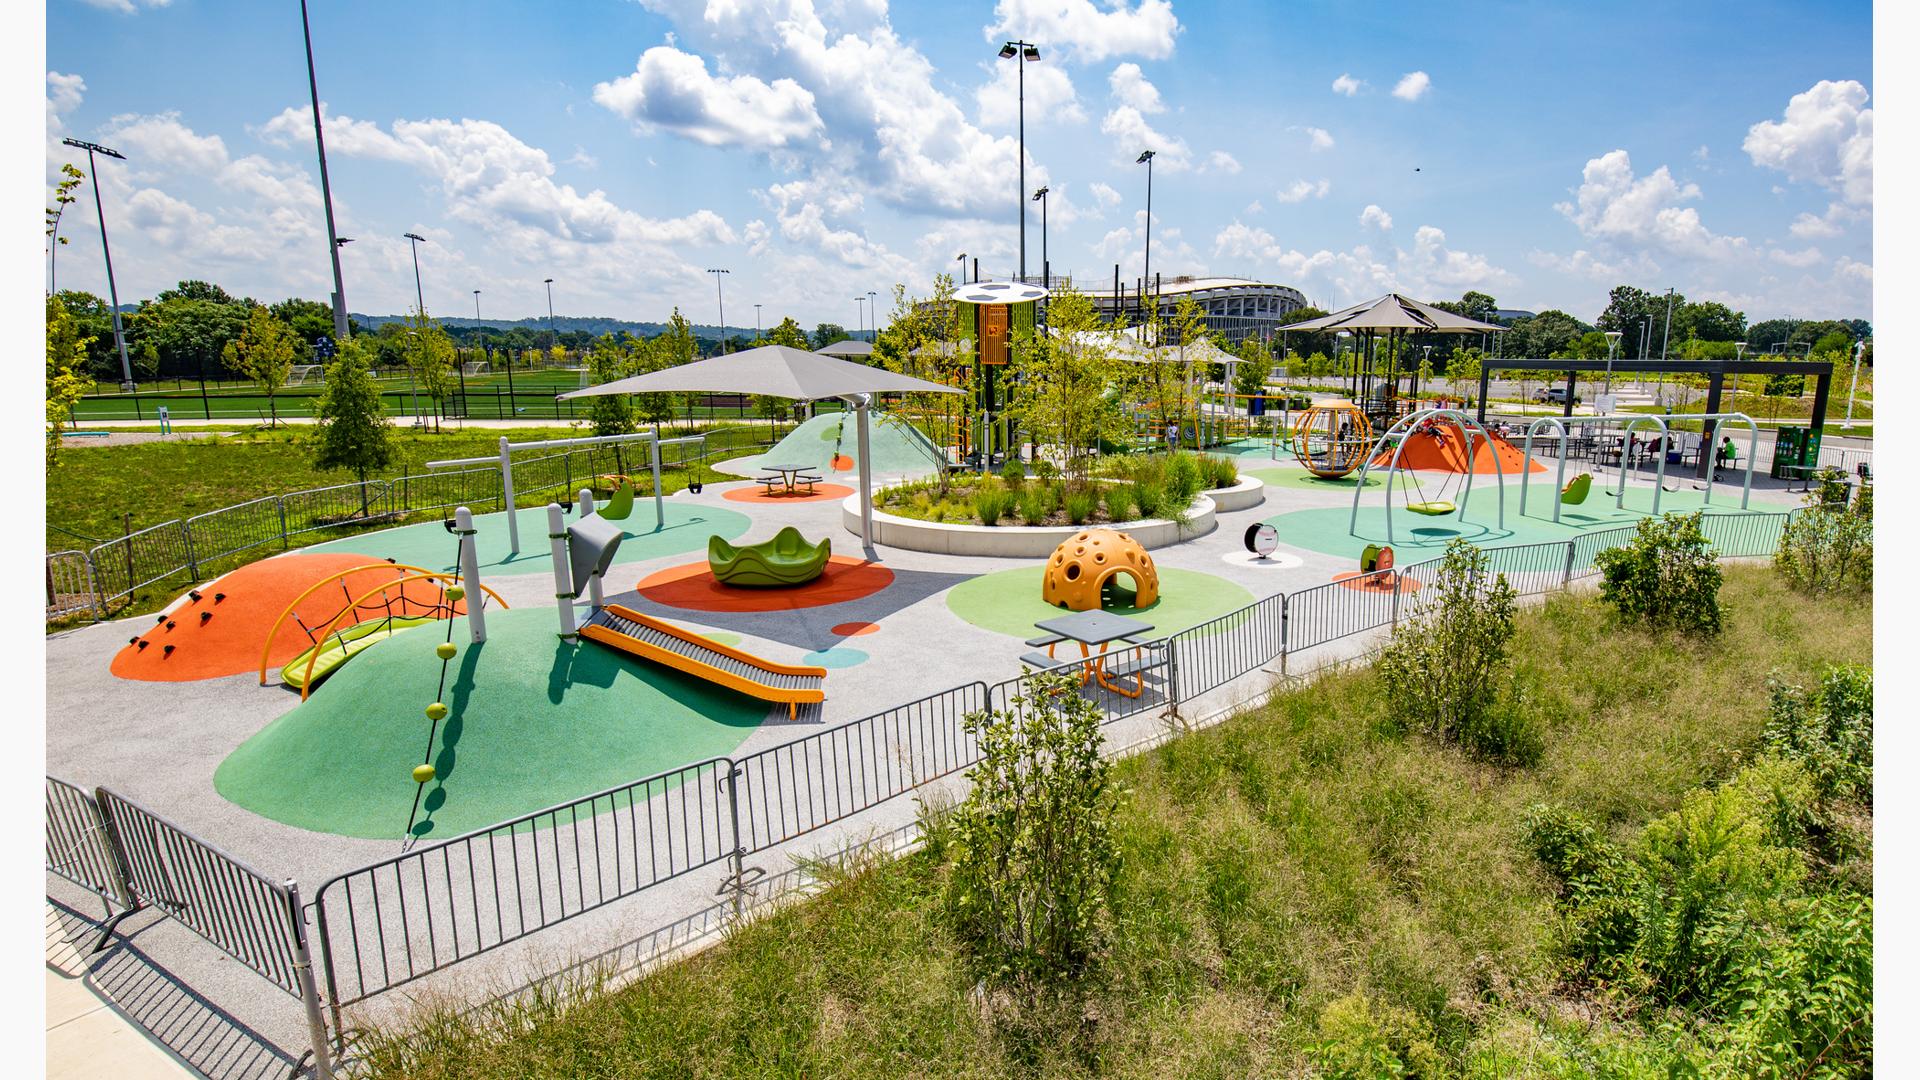 Large play space including merry-go-round, swings, sports-theme playground tower and a playground tower with shade. 